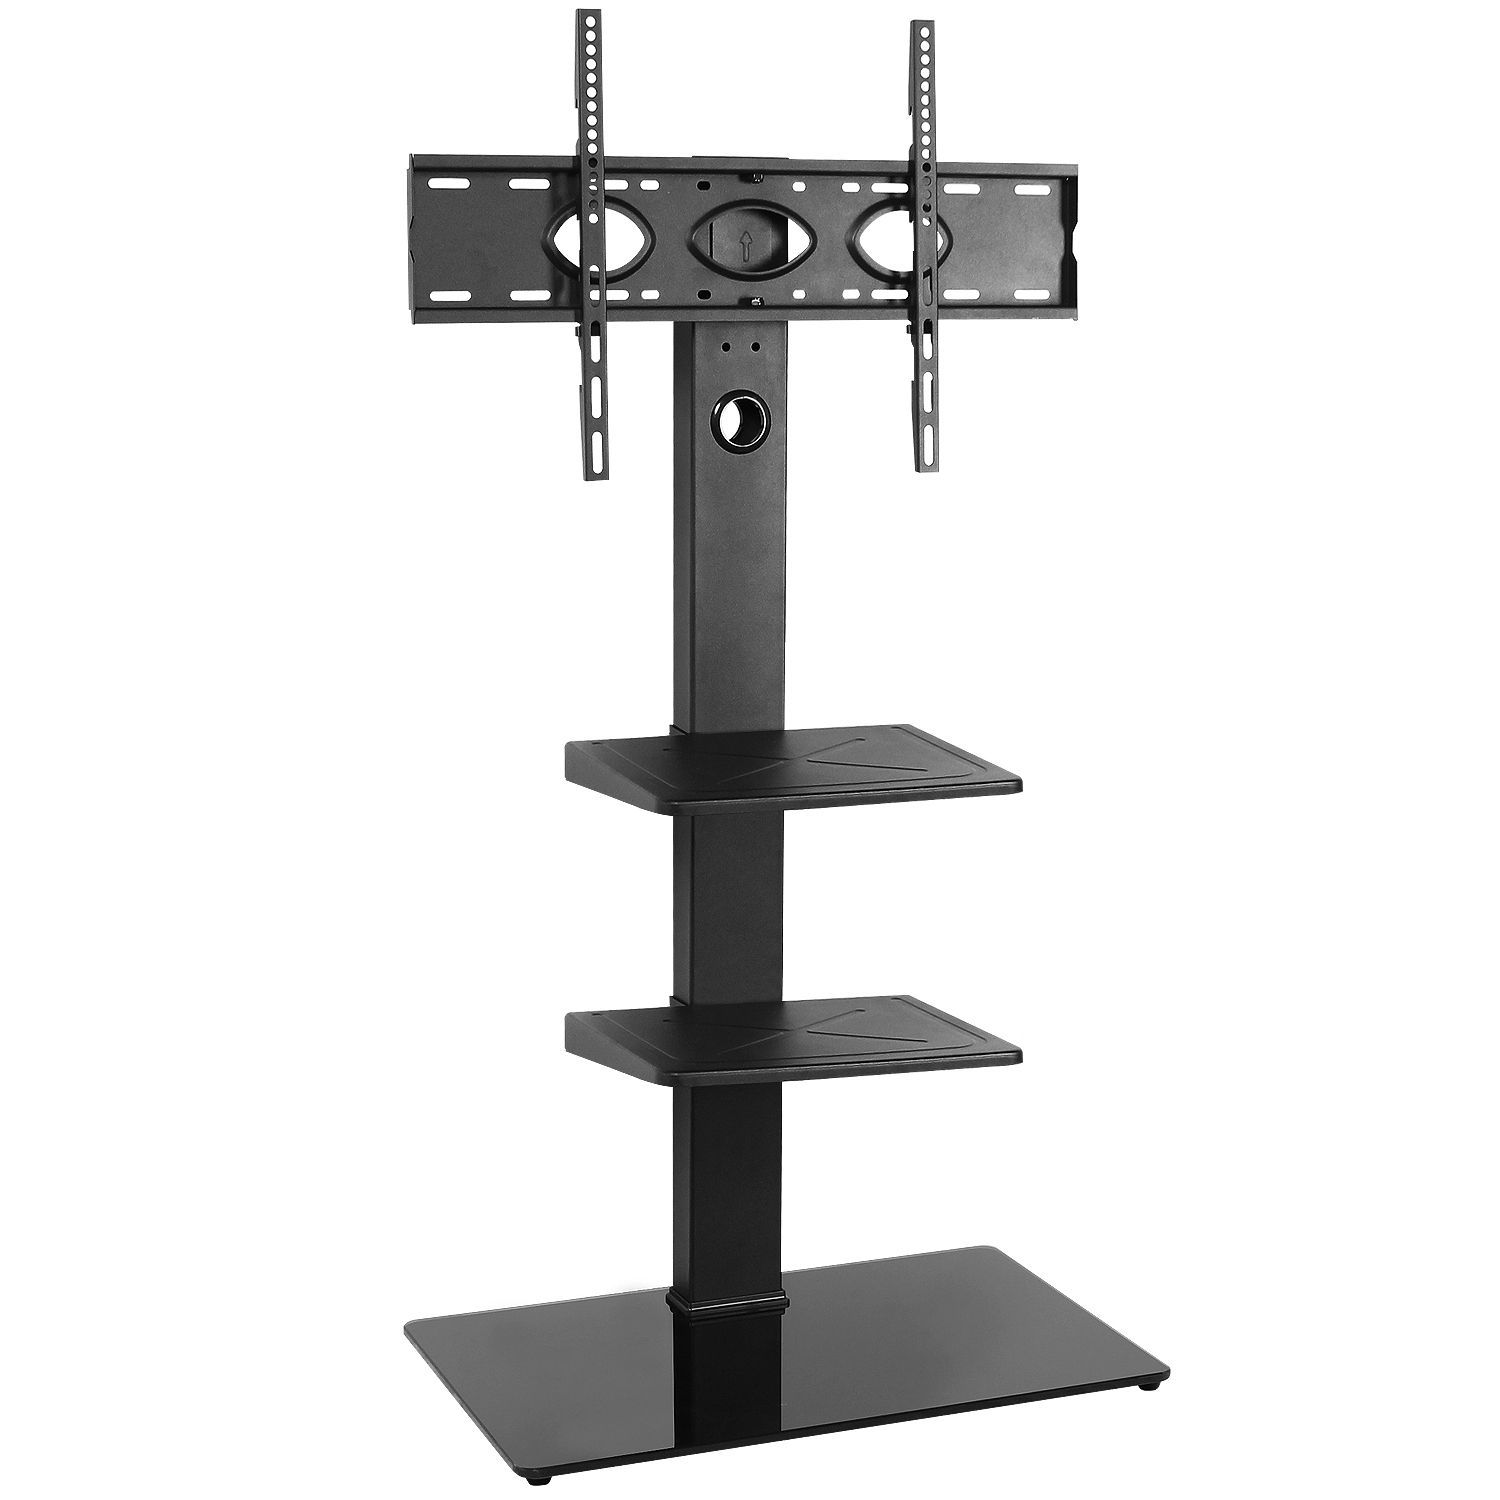 Modern Floor Tv Stands With Swivel Metal Mount Inside Most Recent 5rcom Floor Corner Tall Tv Stand With Swivel Mount For 32 (Photo 8 of 10)